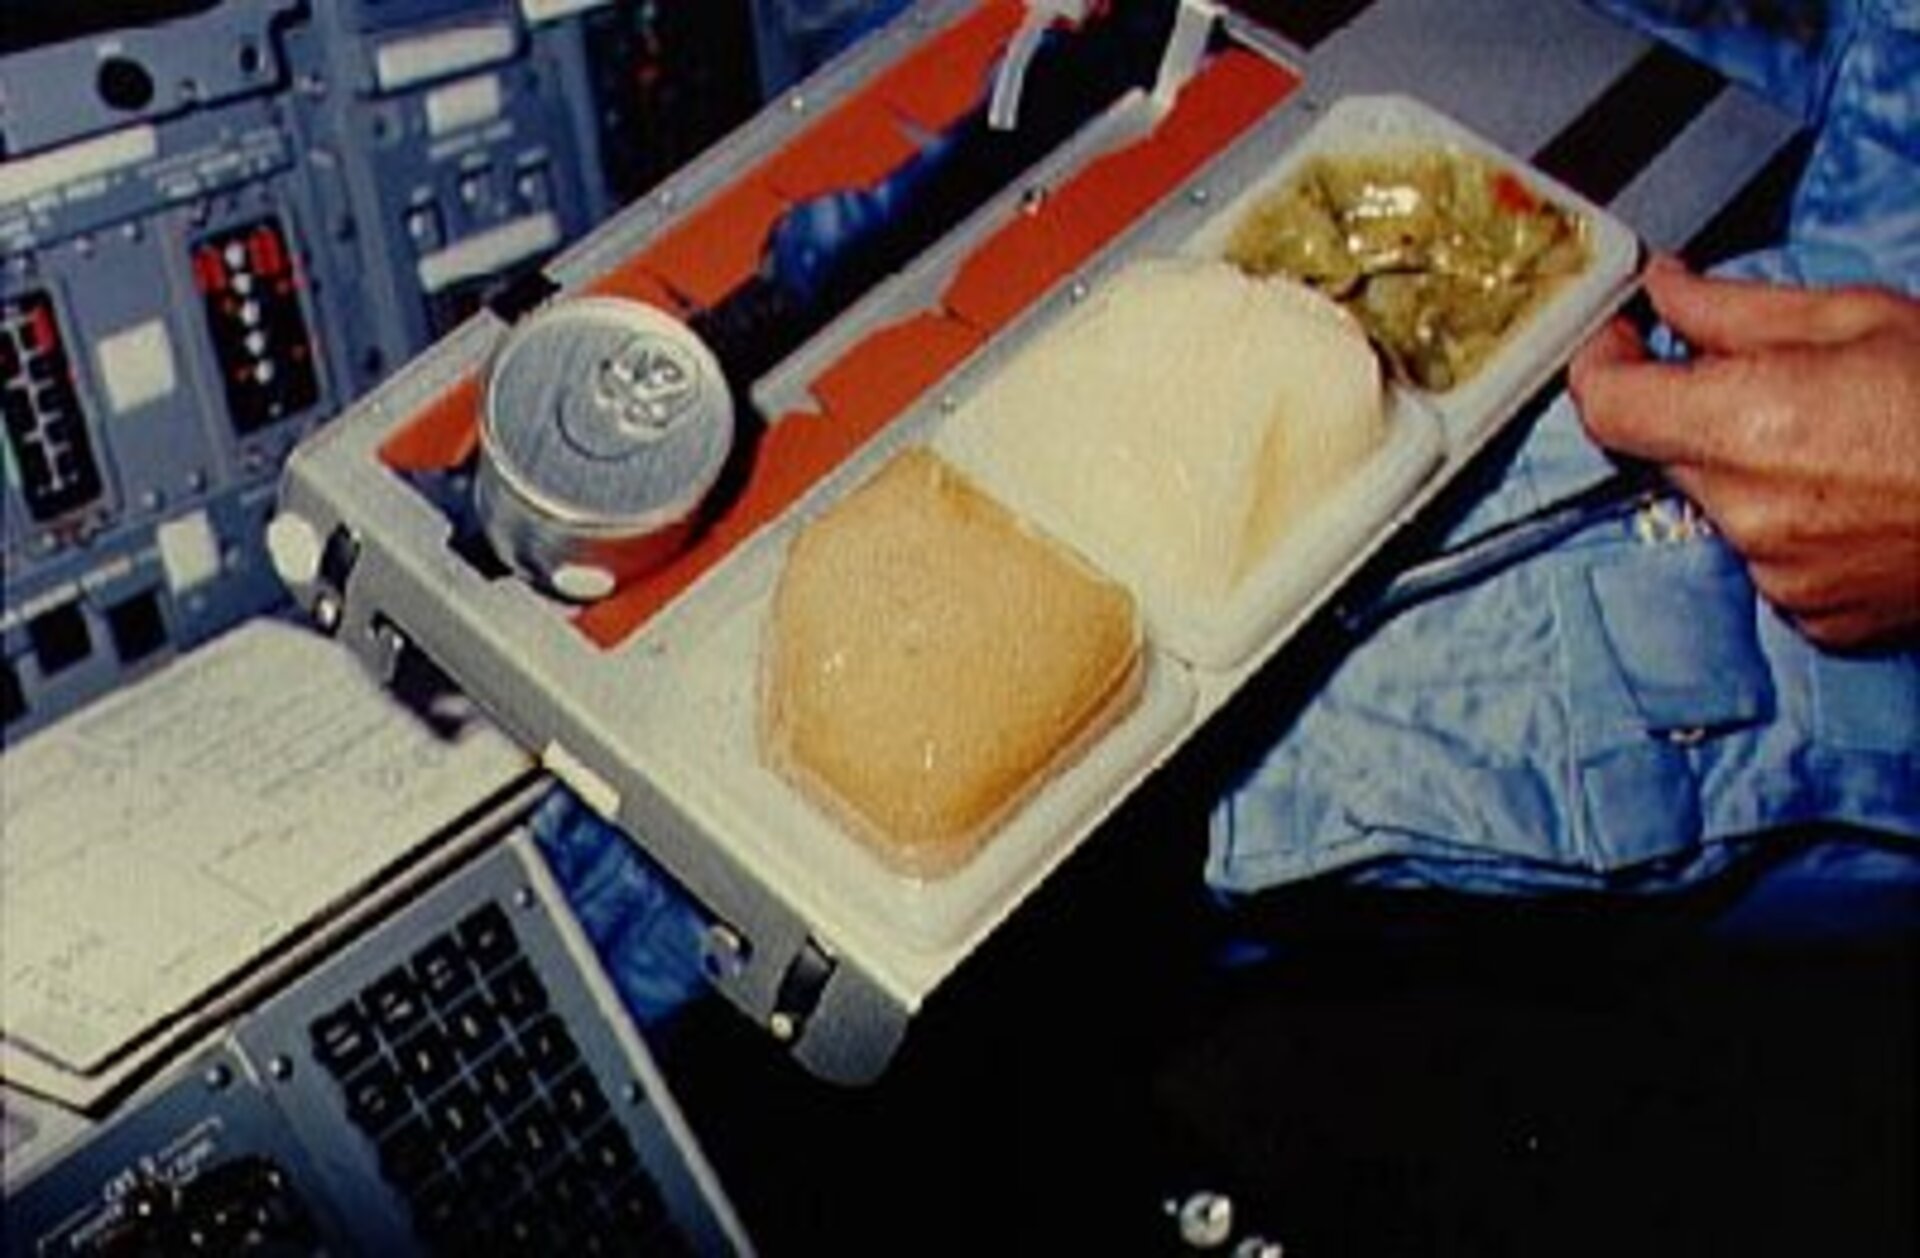 Space Shuttle food tray